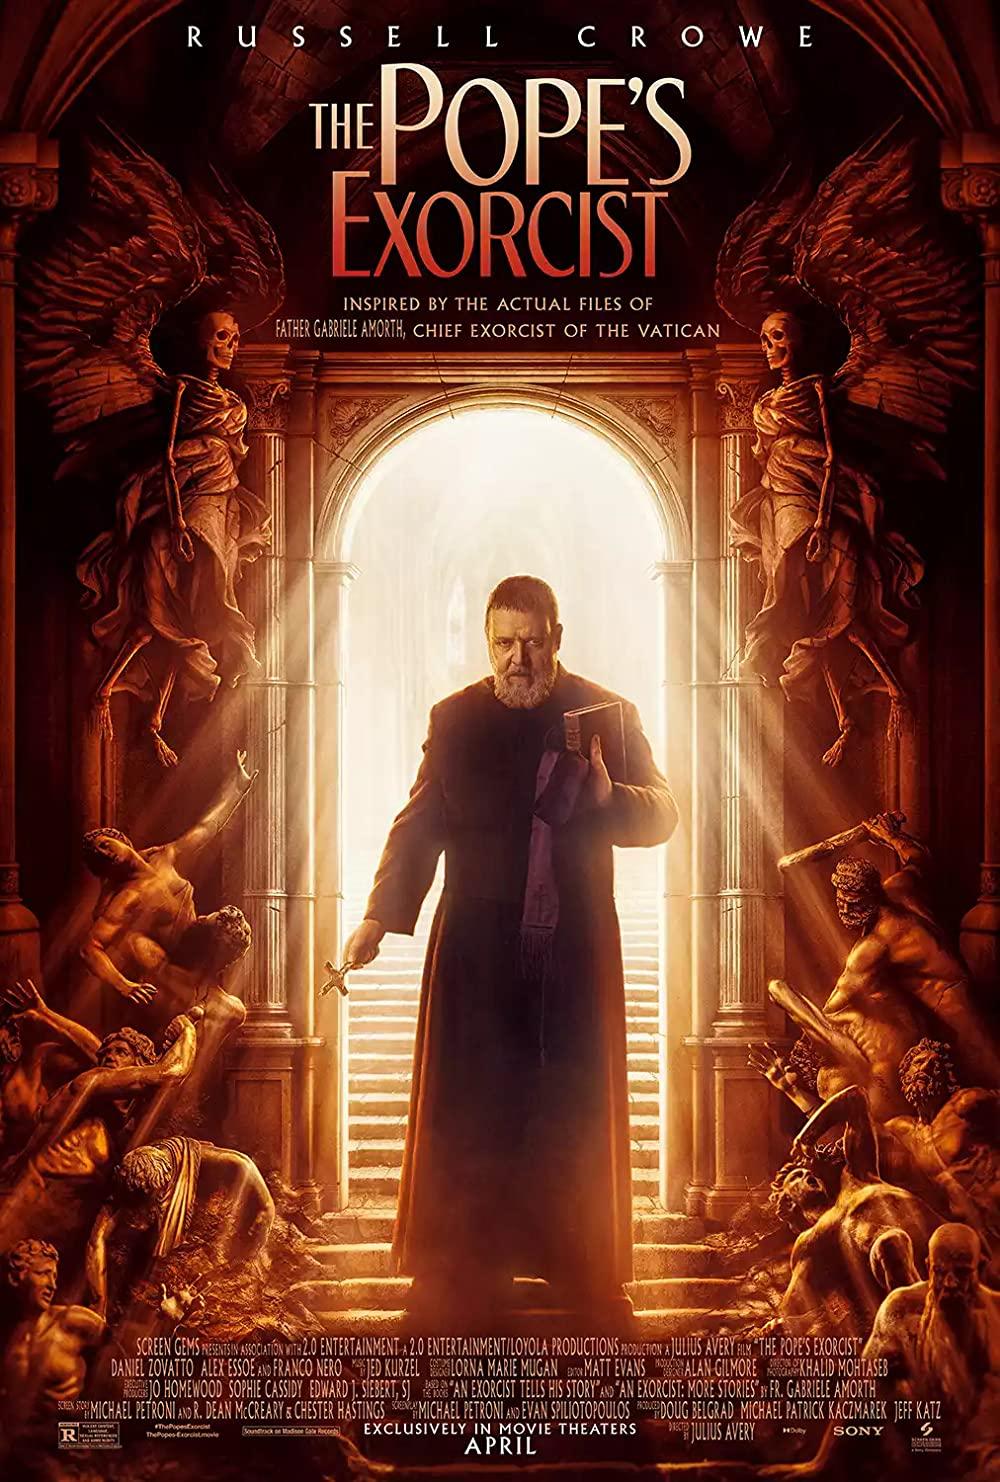 The Pope's Exorcist: Based on true events, this film delves into the life of Father Gabriele Amorth, the Vatican's chief exorcist, as he battles demonic possessions and confronts evil forces.